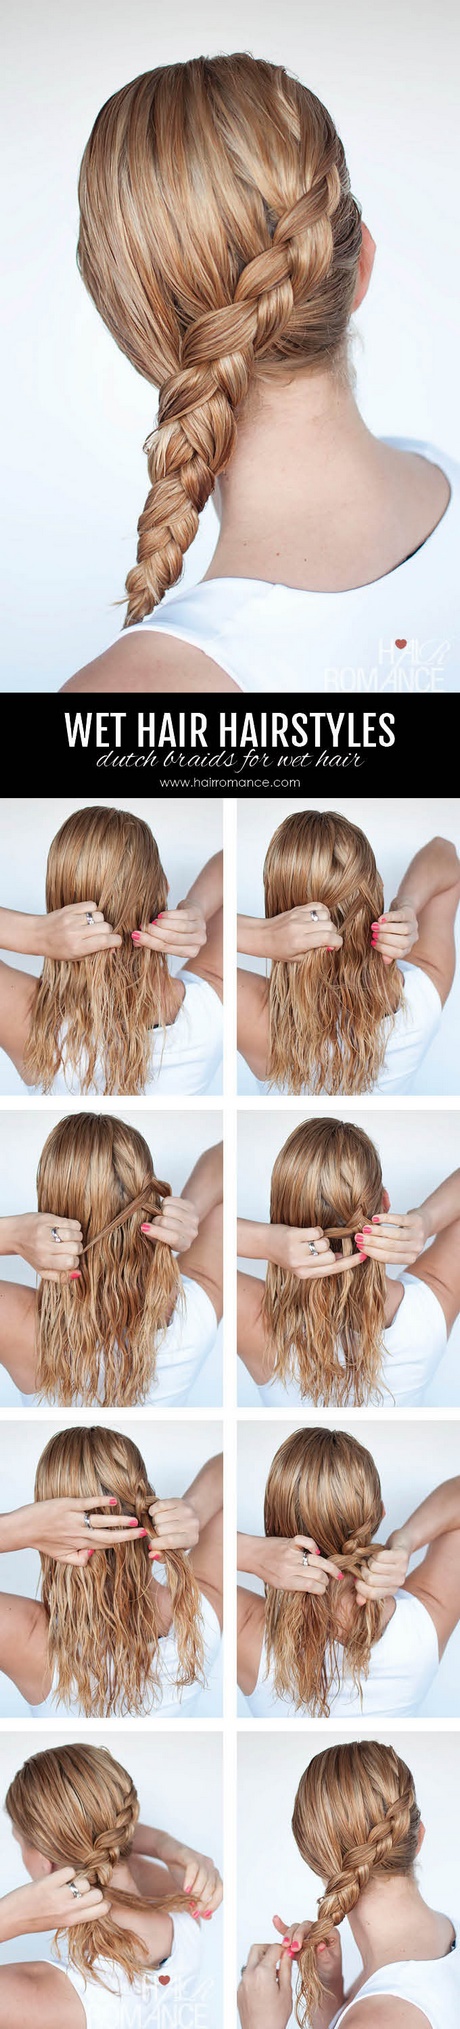 hairstyles-i-can-do-on-my-own-12_10 Hairstyles i can do on my own